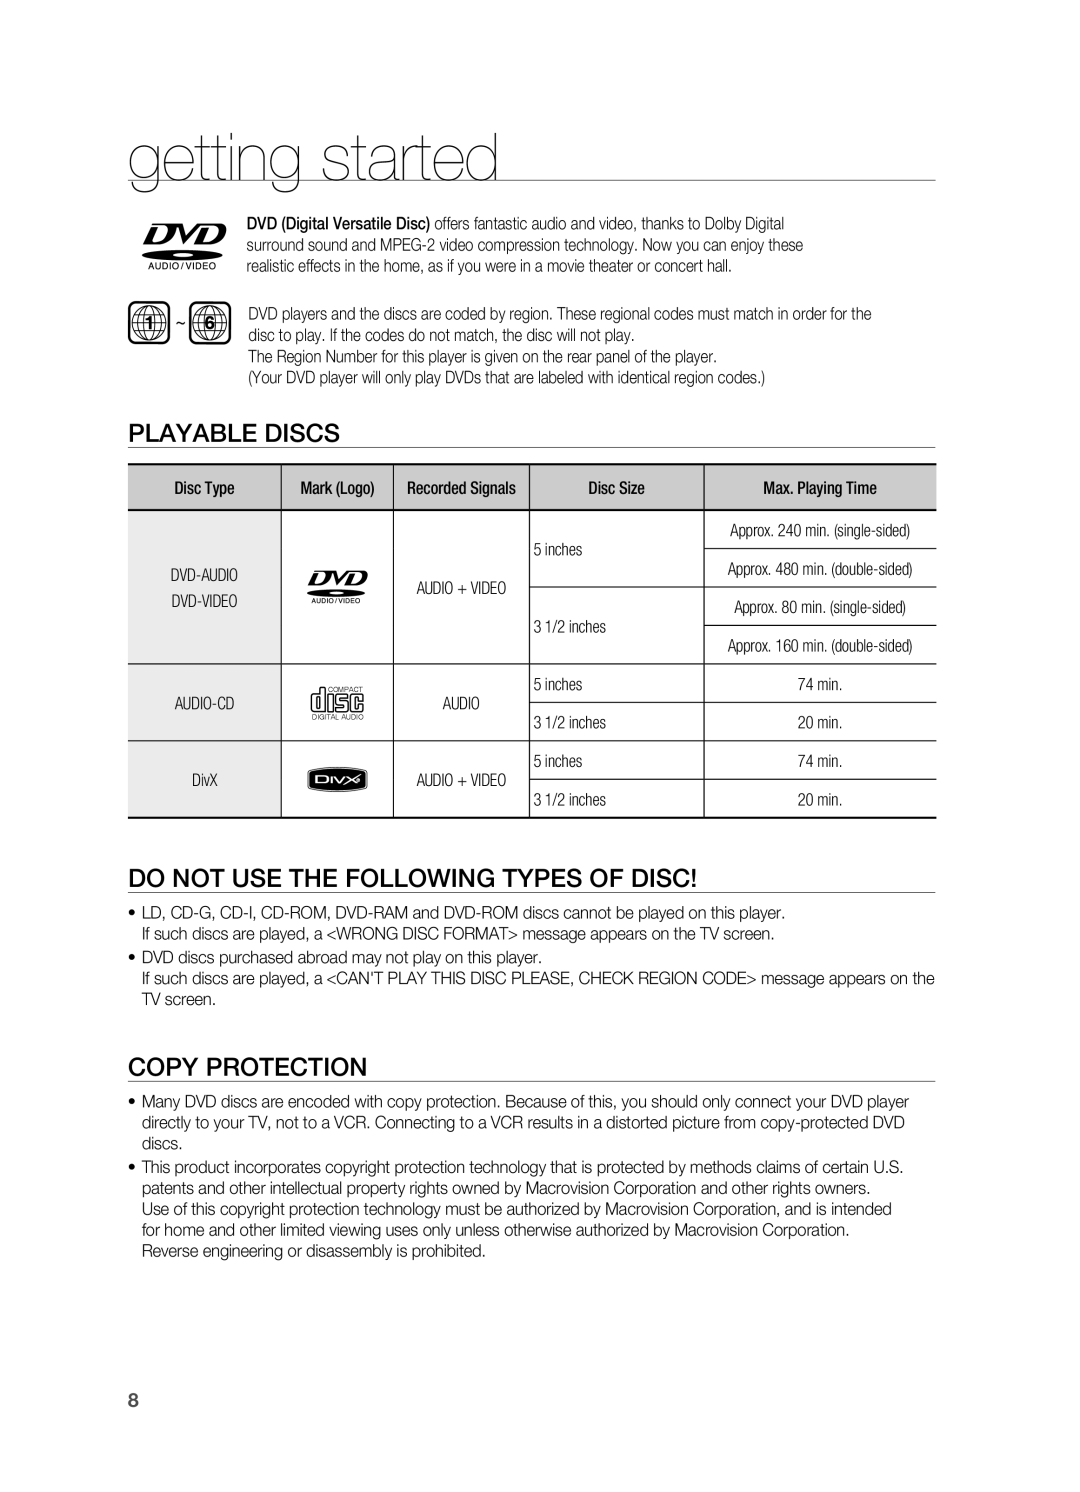 Samsung HT-A100 user manual Playable Discs, Do not use the following types of disc, Copy Protection, getting started 